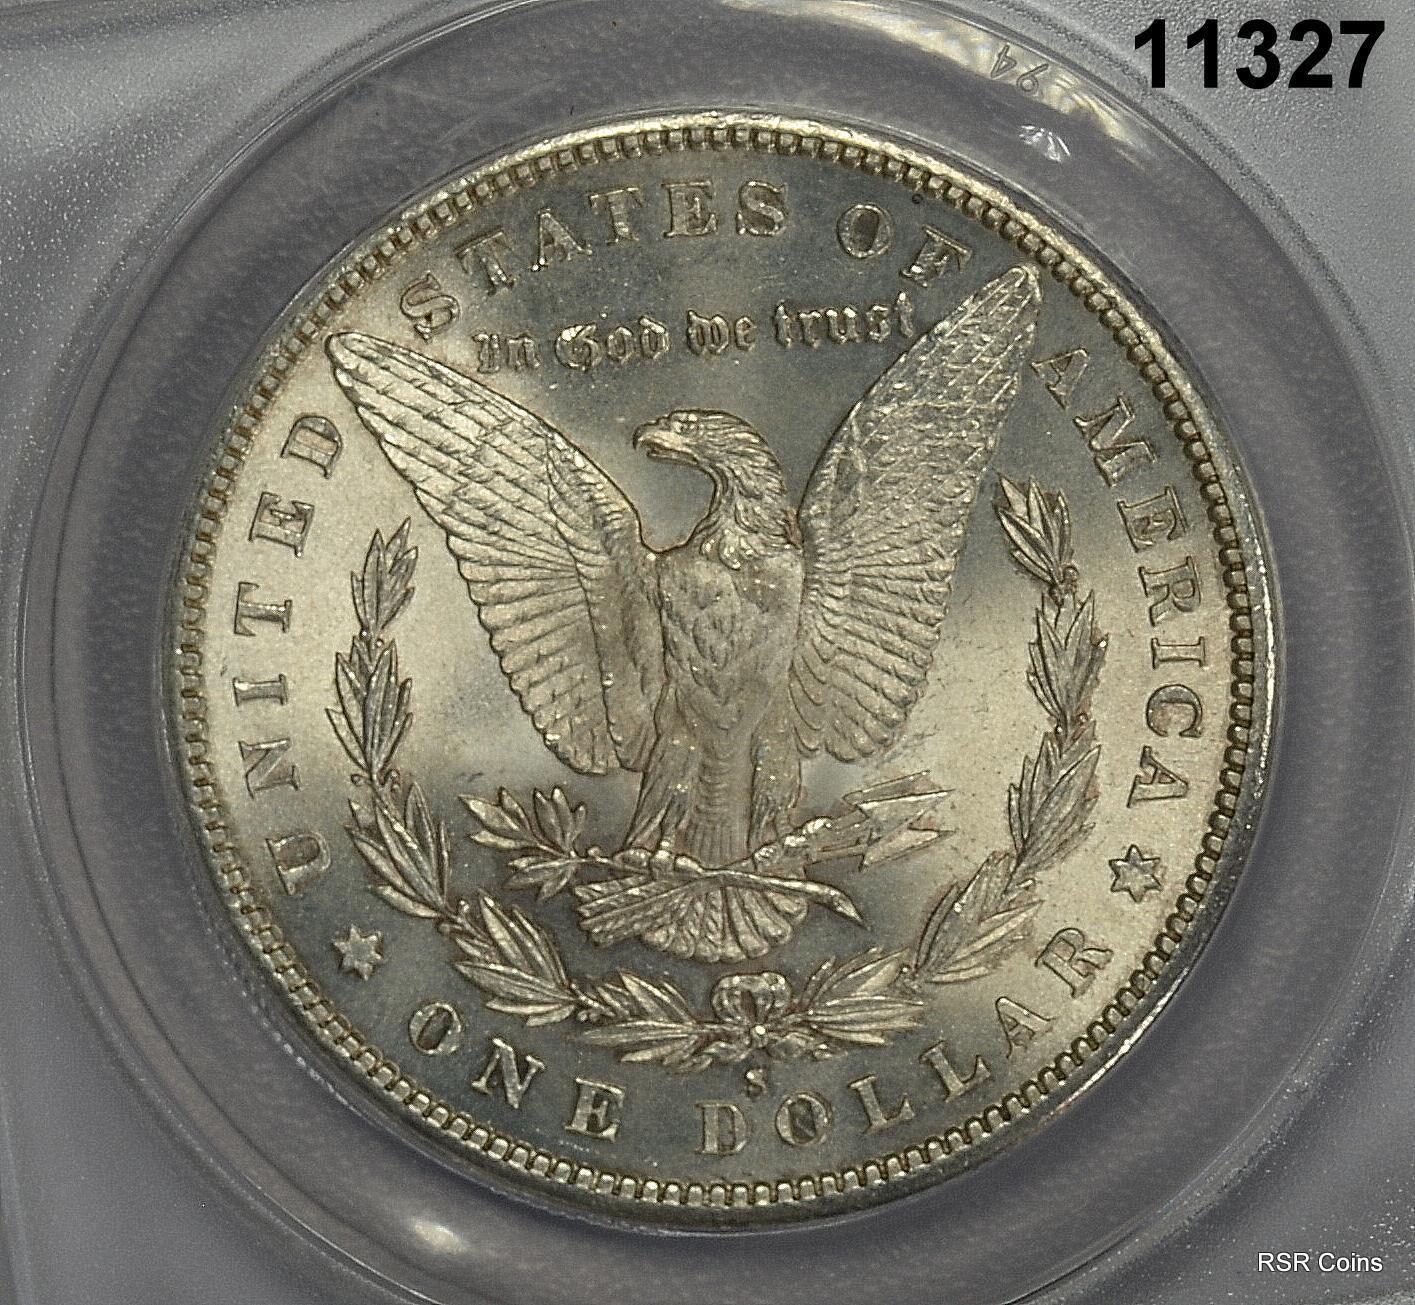 1881 S MORGAN SILVER DOLLAR ANACS CERTIFIED MS62 PALE GOLDEN! #11327